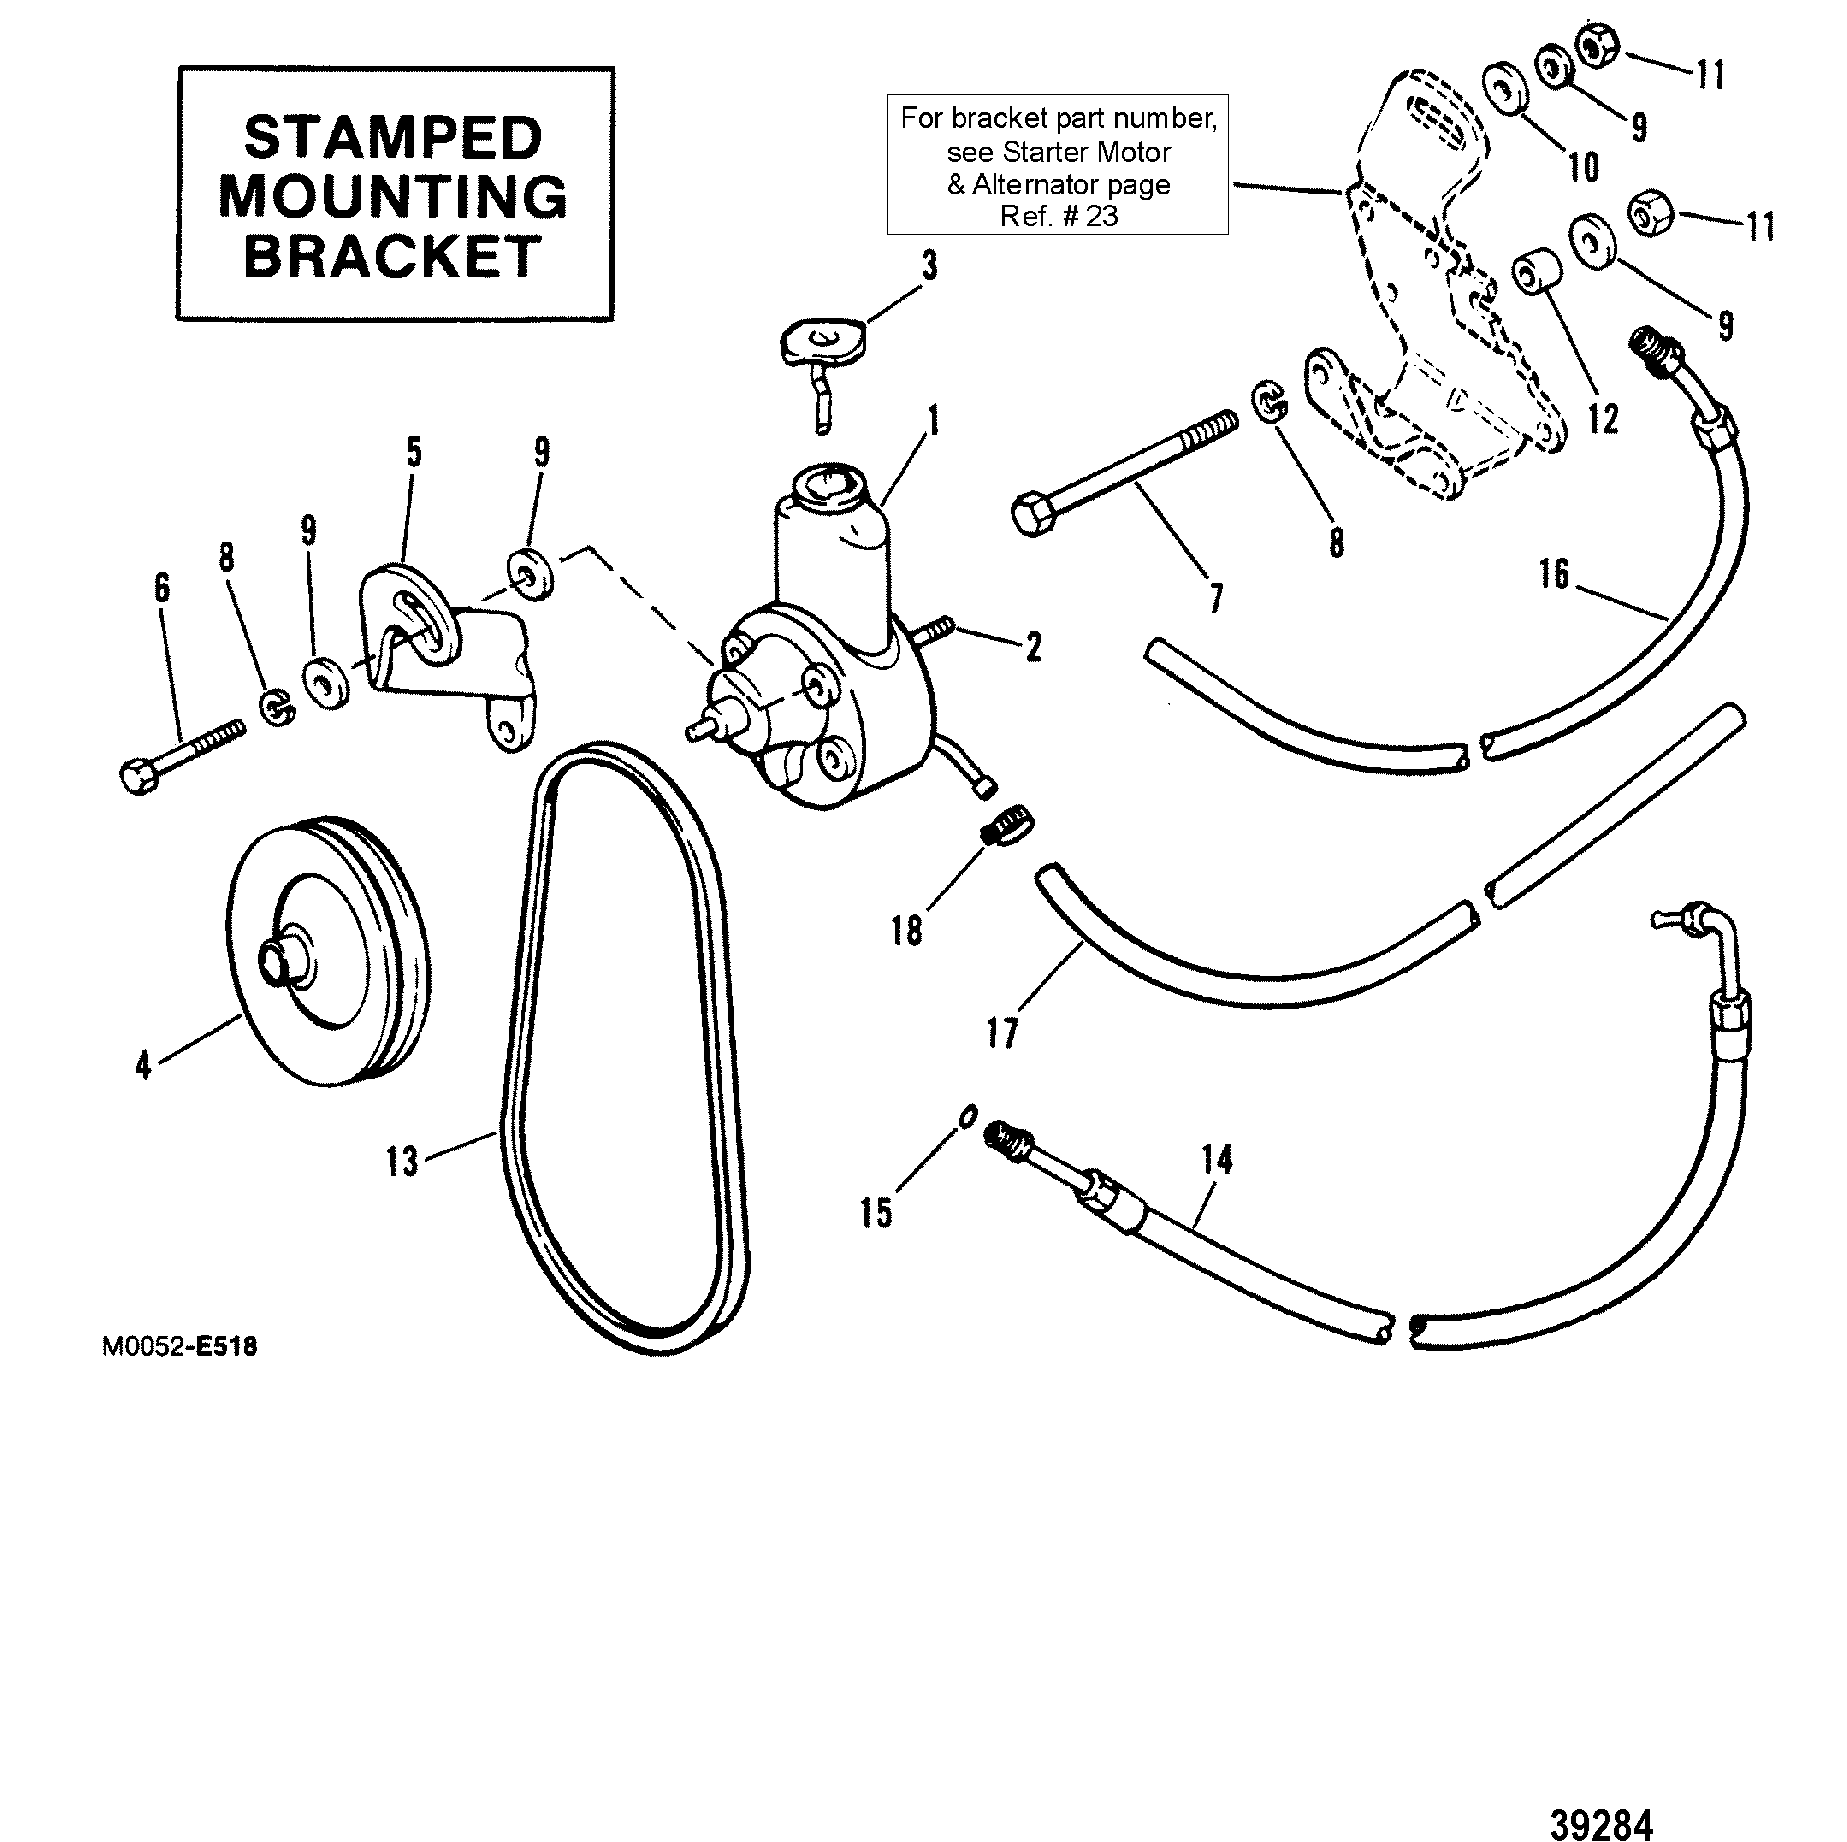 POWER STEERING COMPONENTS , STAMPED MOUNTING BRACKET